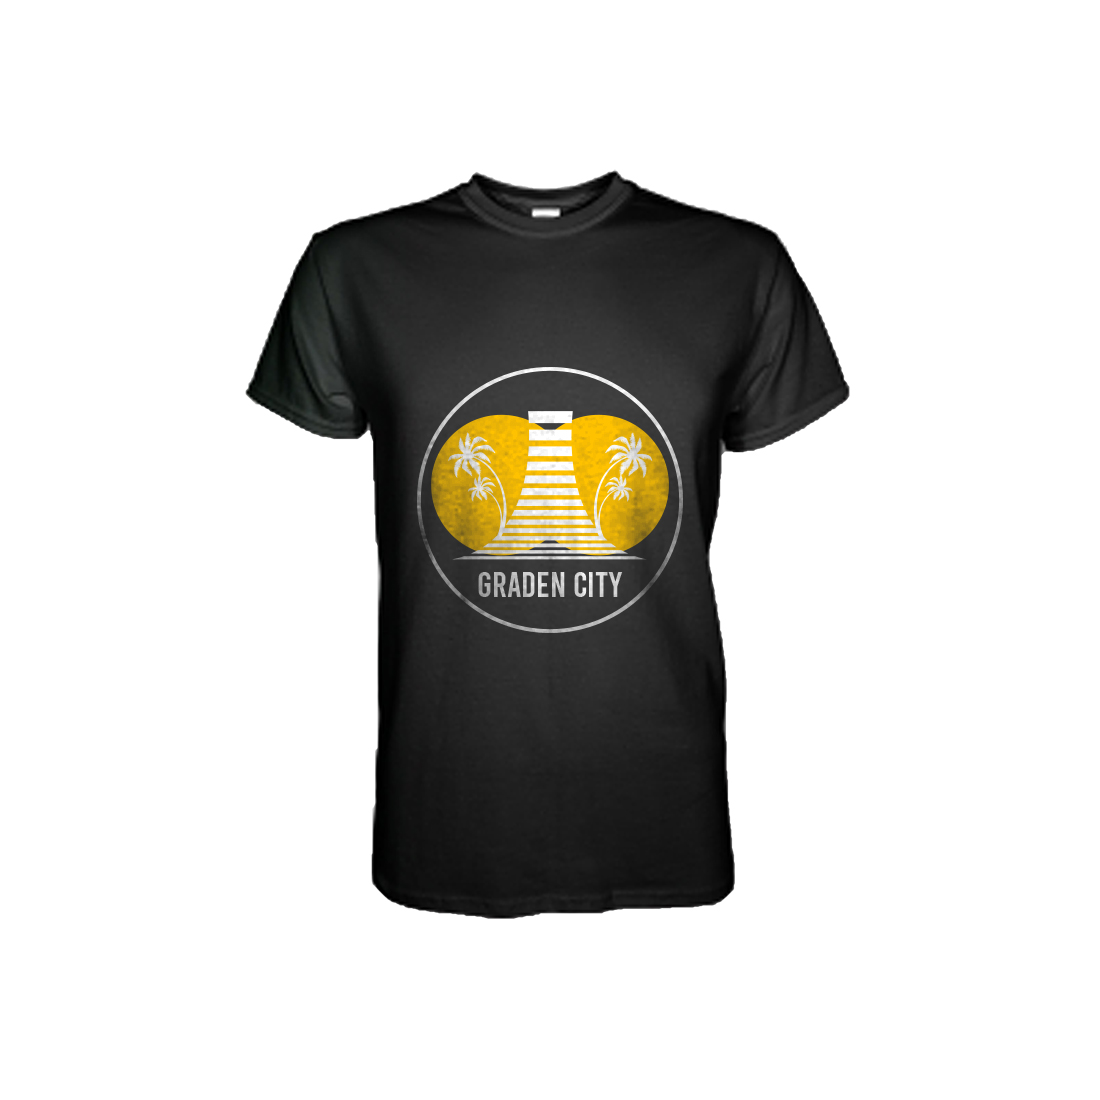 Image of a black t-shirt with wonderful garden city print